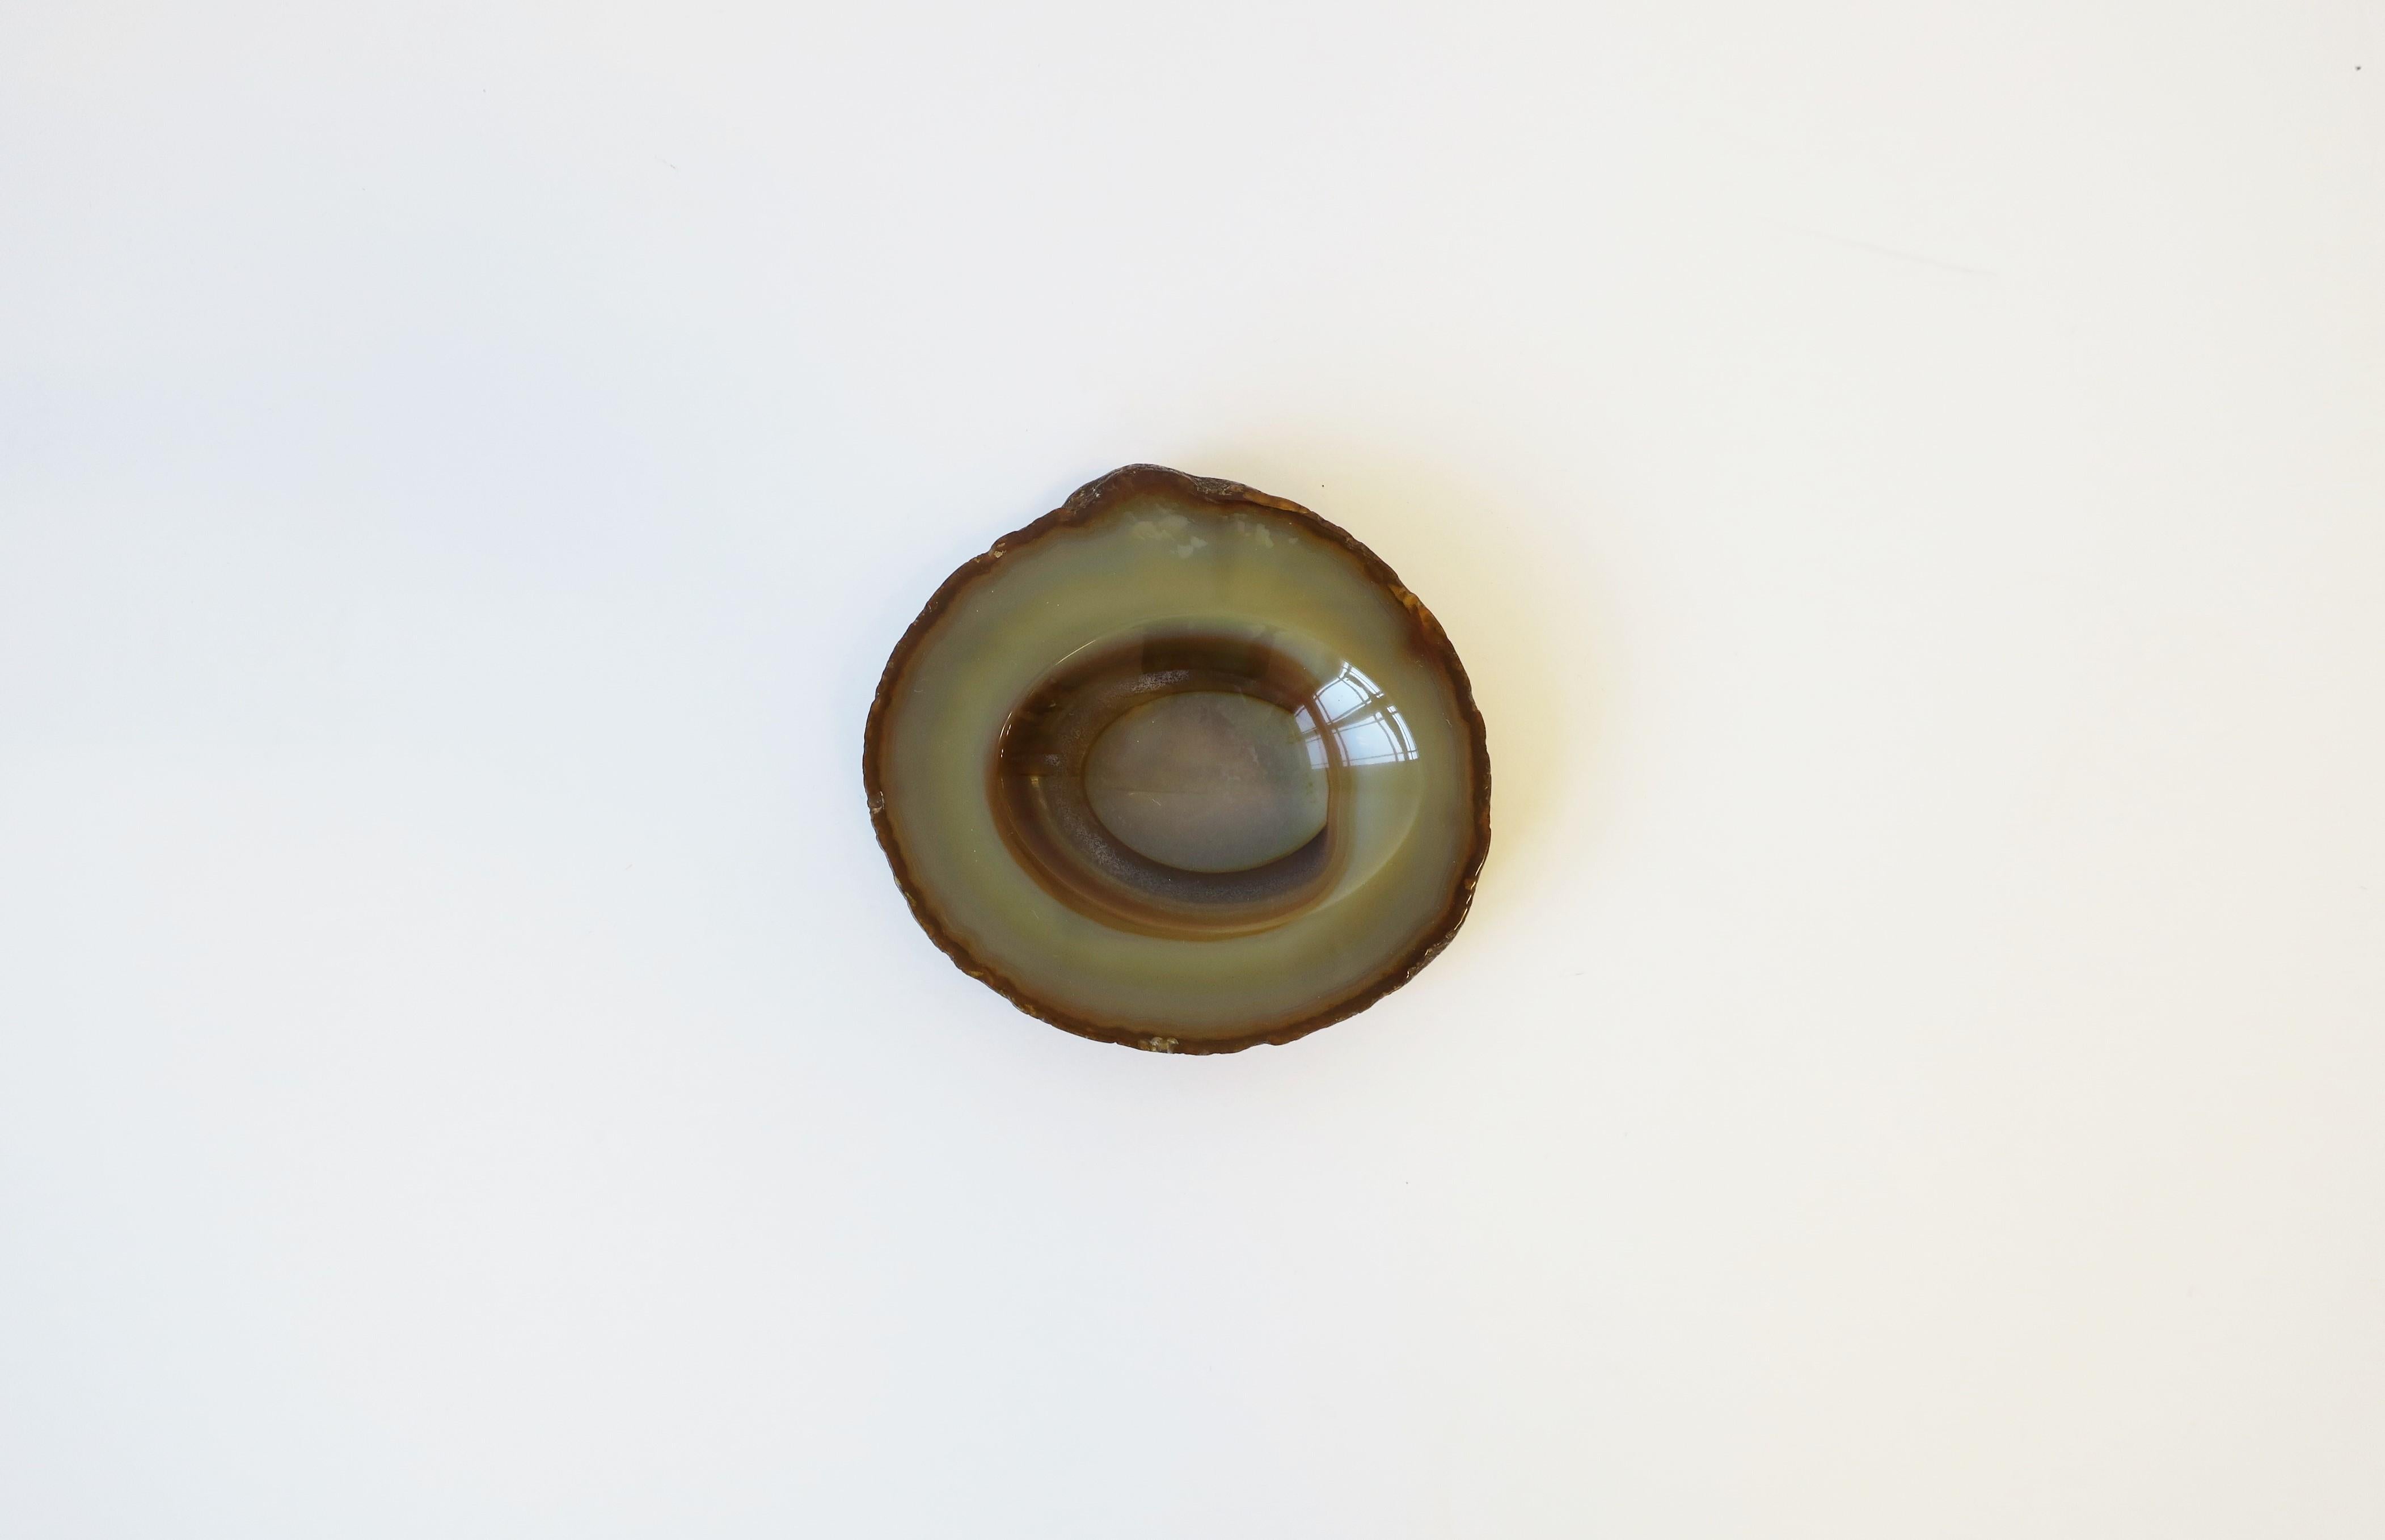 A neutral onyx agate dish, decorative object, or small bowl/vessel. Piece can work as a small jewelry/trinket dish, a standalone decorative piece, or paperweight/desk accessory for small items, etc. Elegant and convenient for a table, office desk,